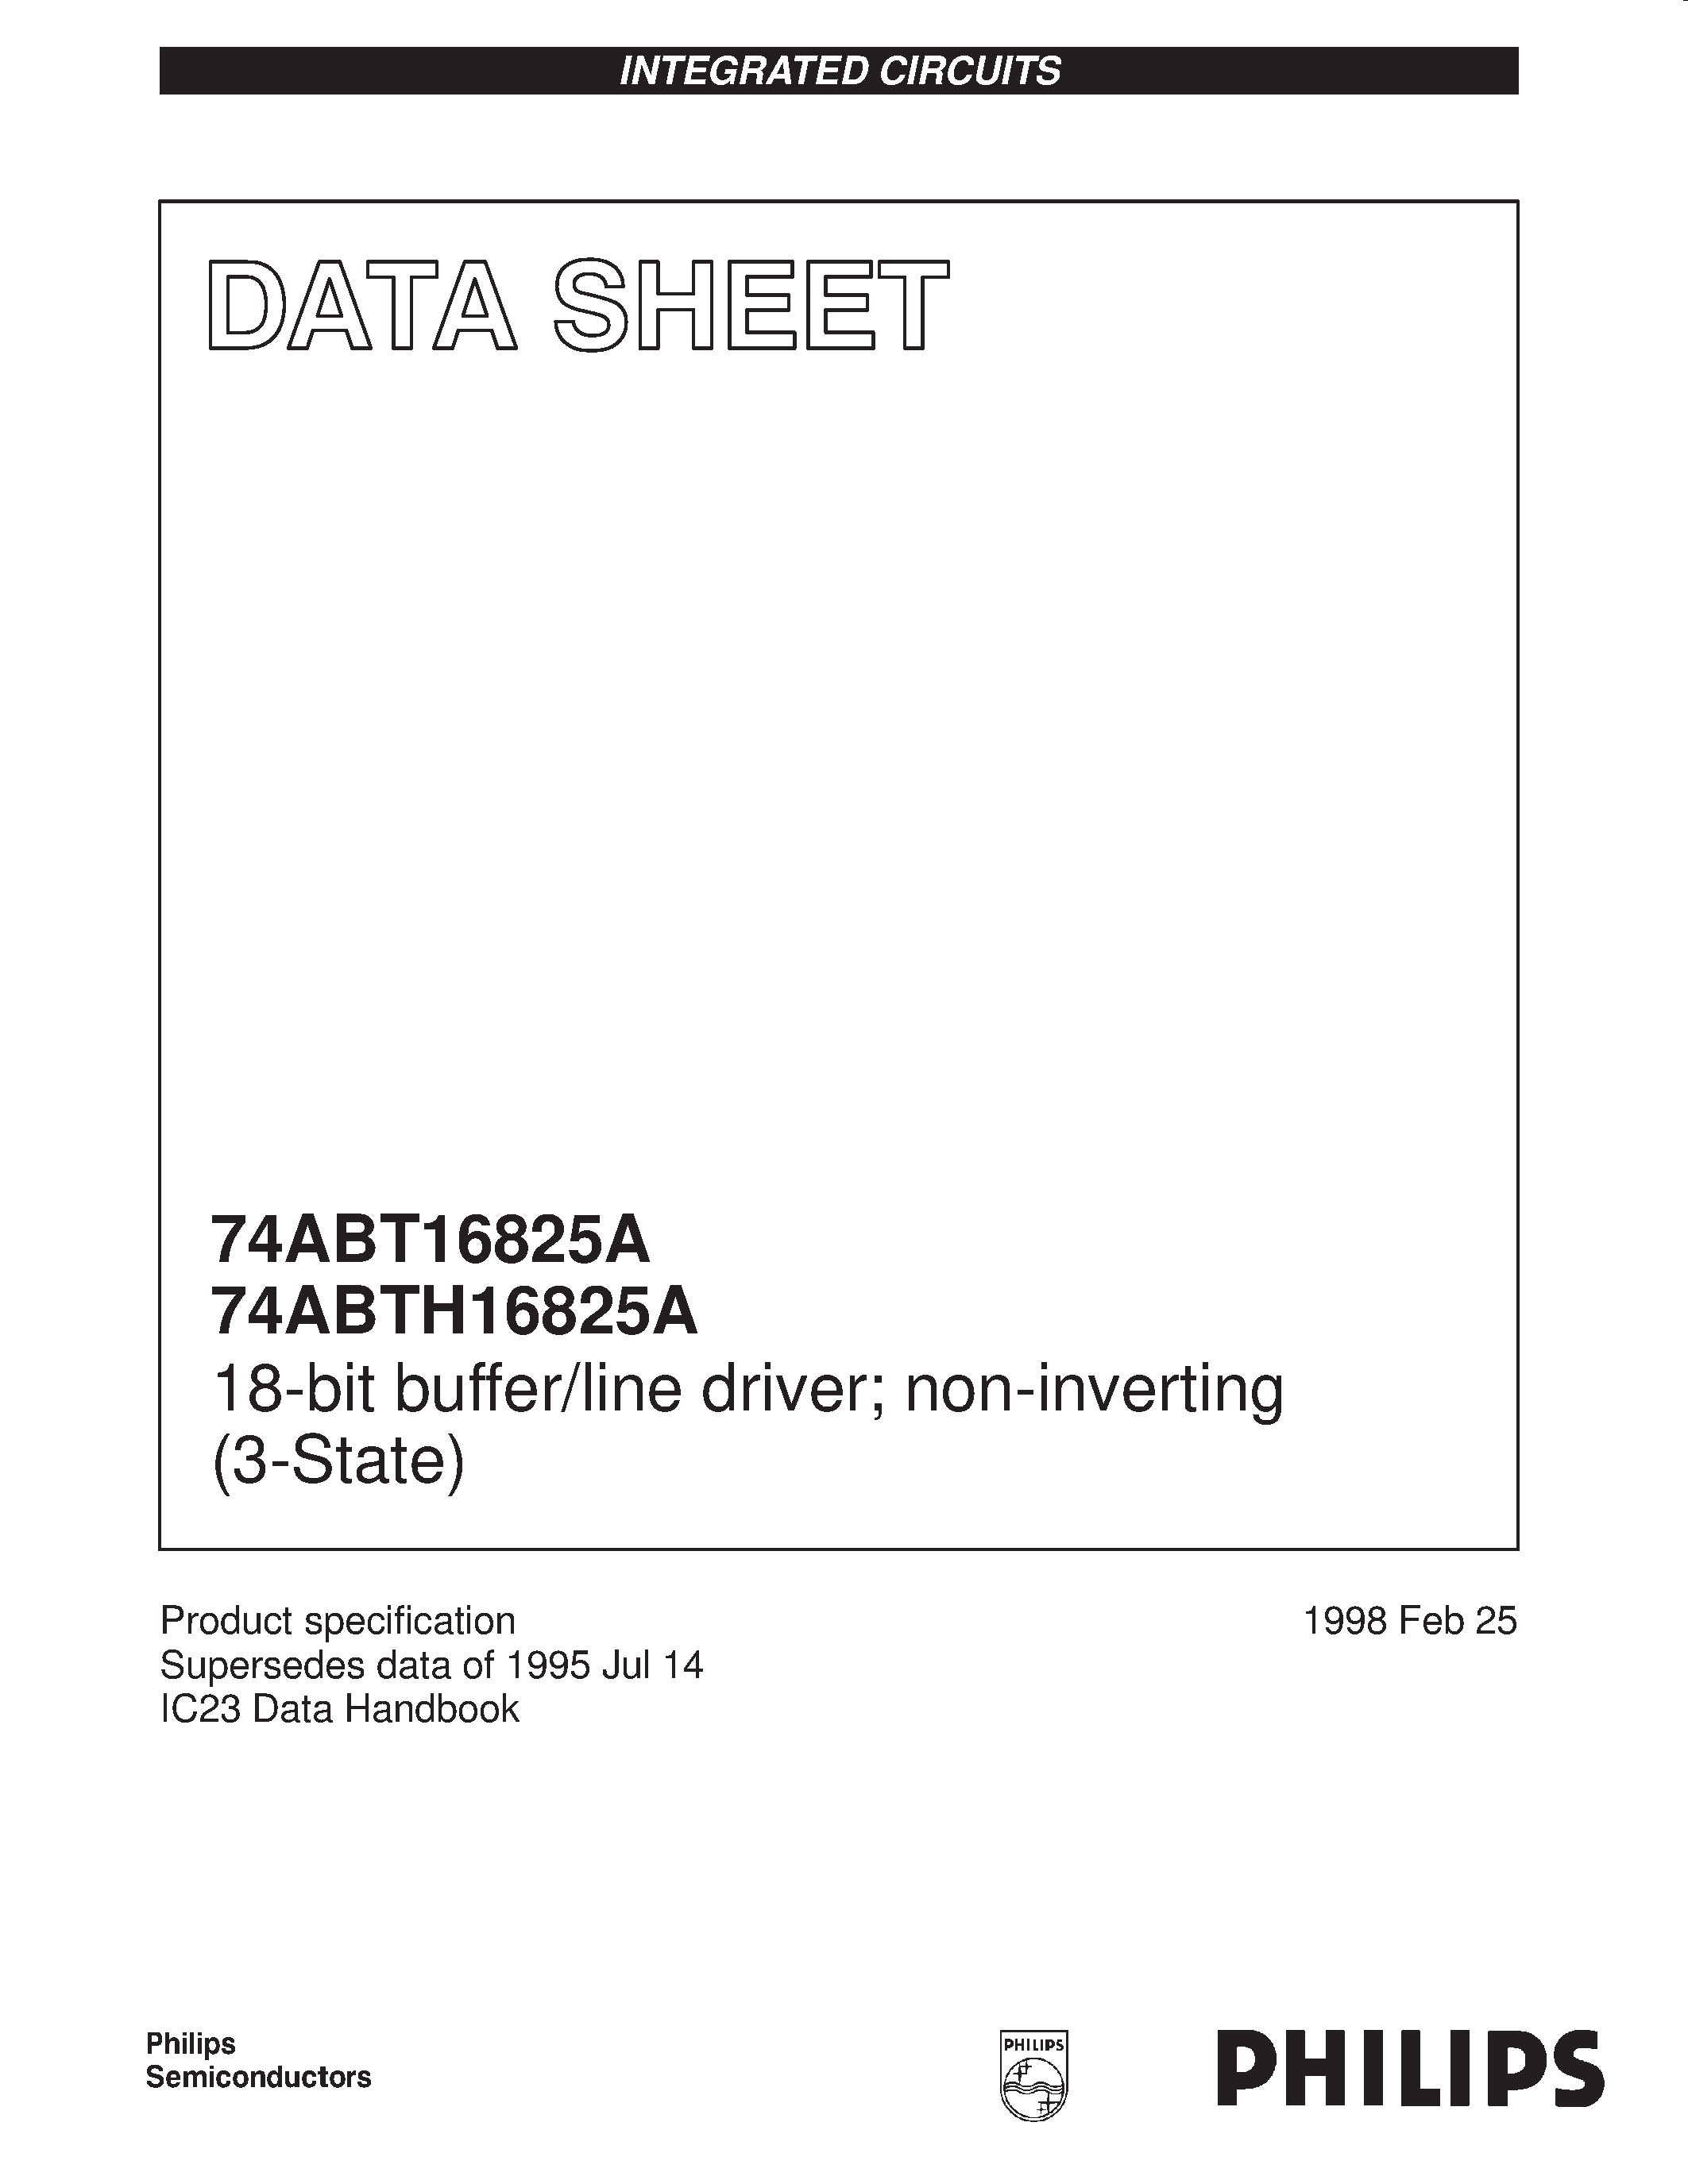 Datasheet 74ABTH16825ADL - 18-bit buffer/line driver; non-inverting 3-State page 1